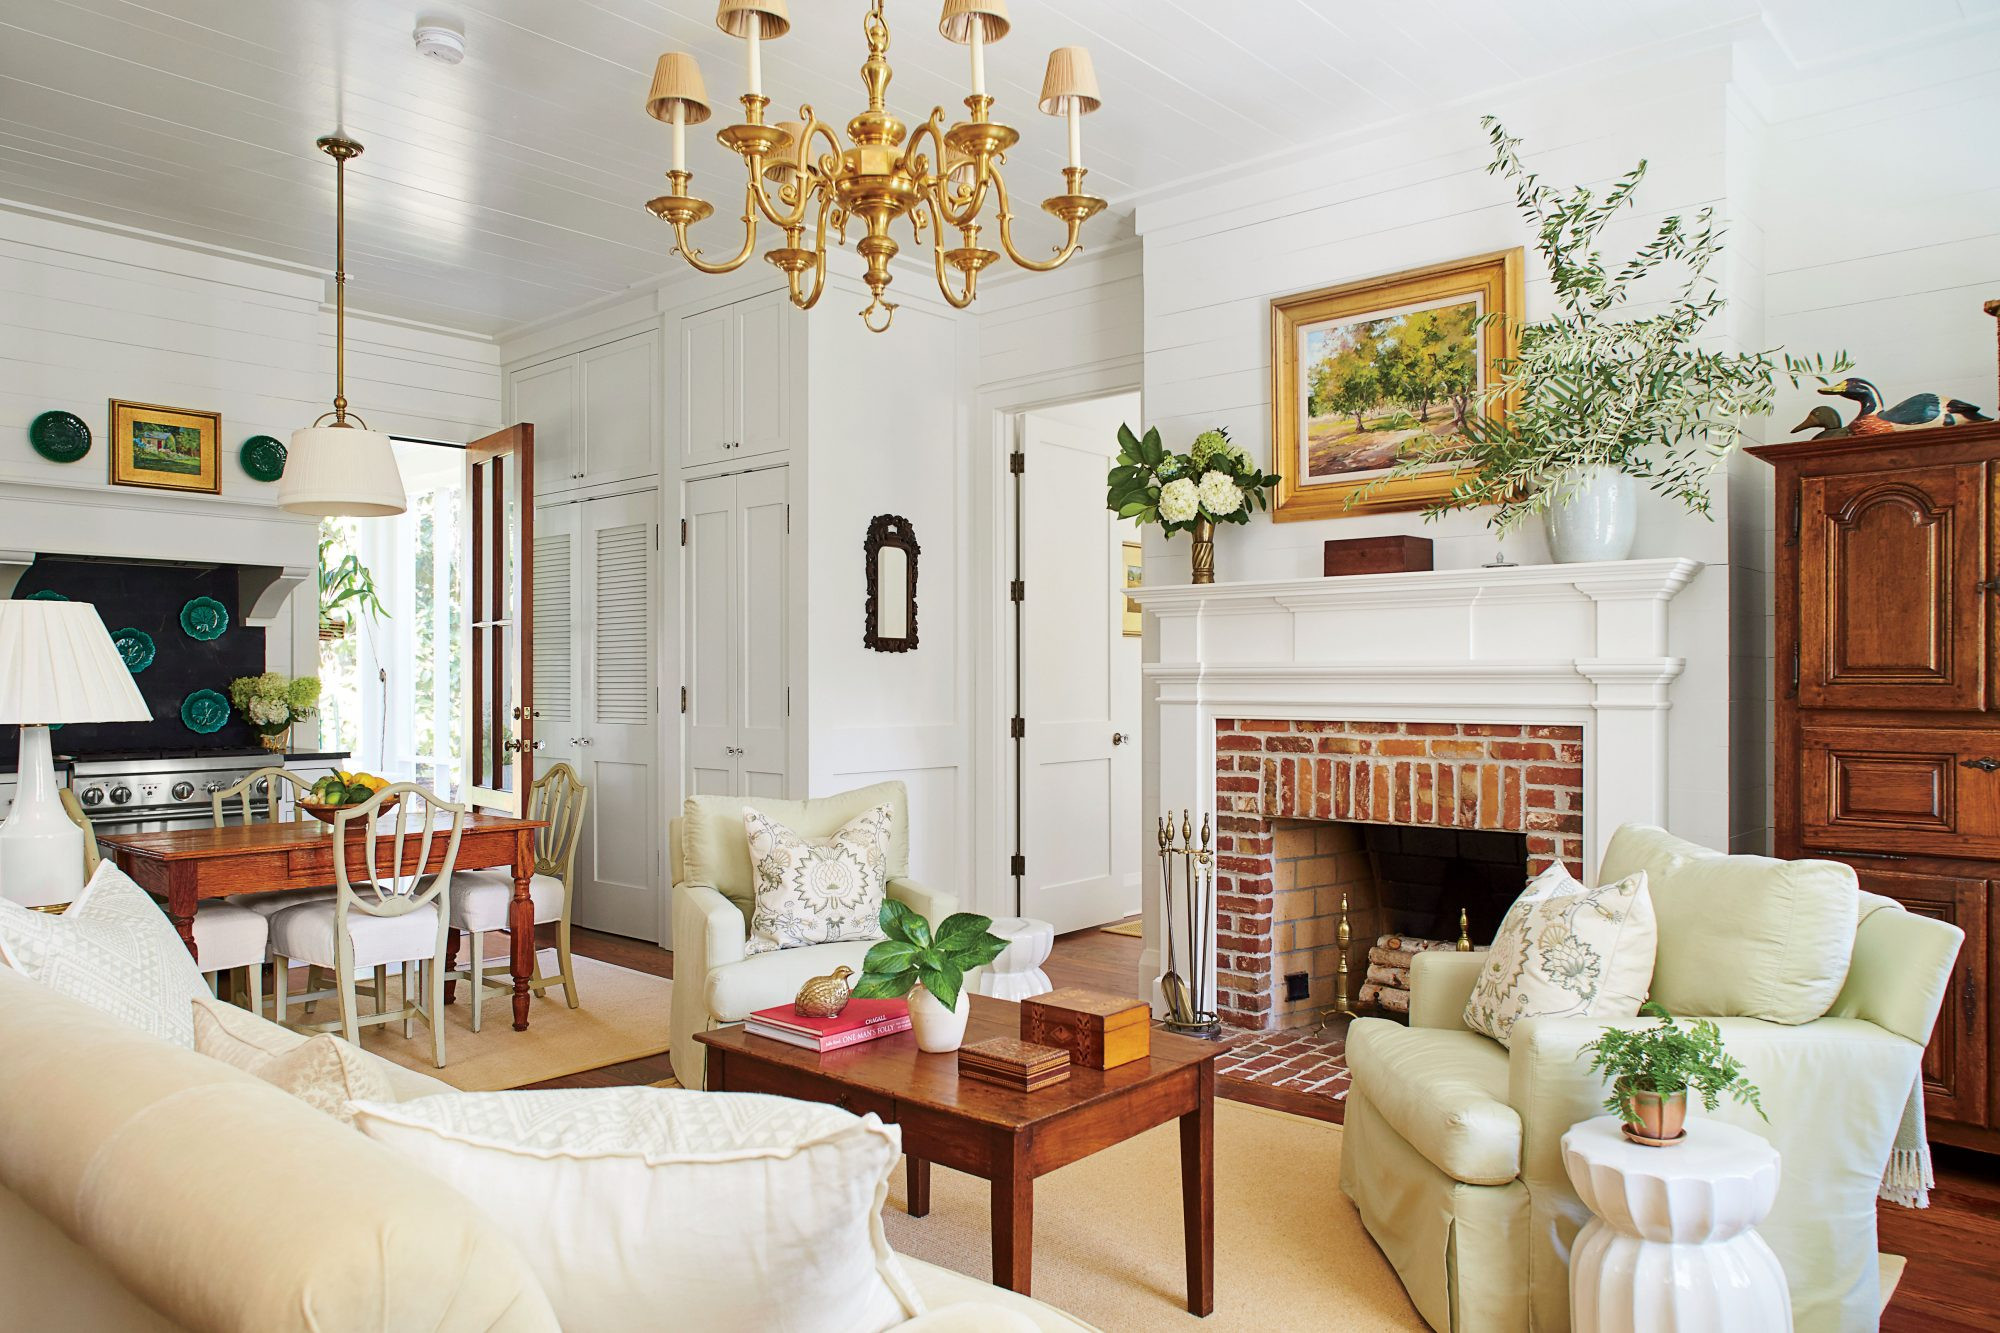 Southern Living At Home Decor
 Southern Home Decor Trends & Styles Southern Living